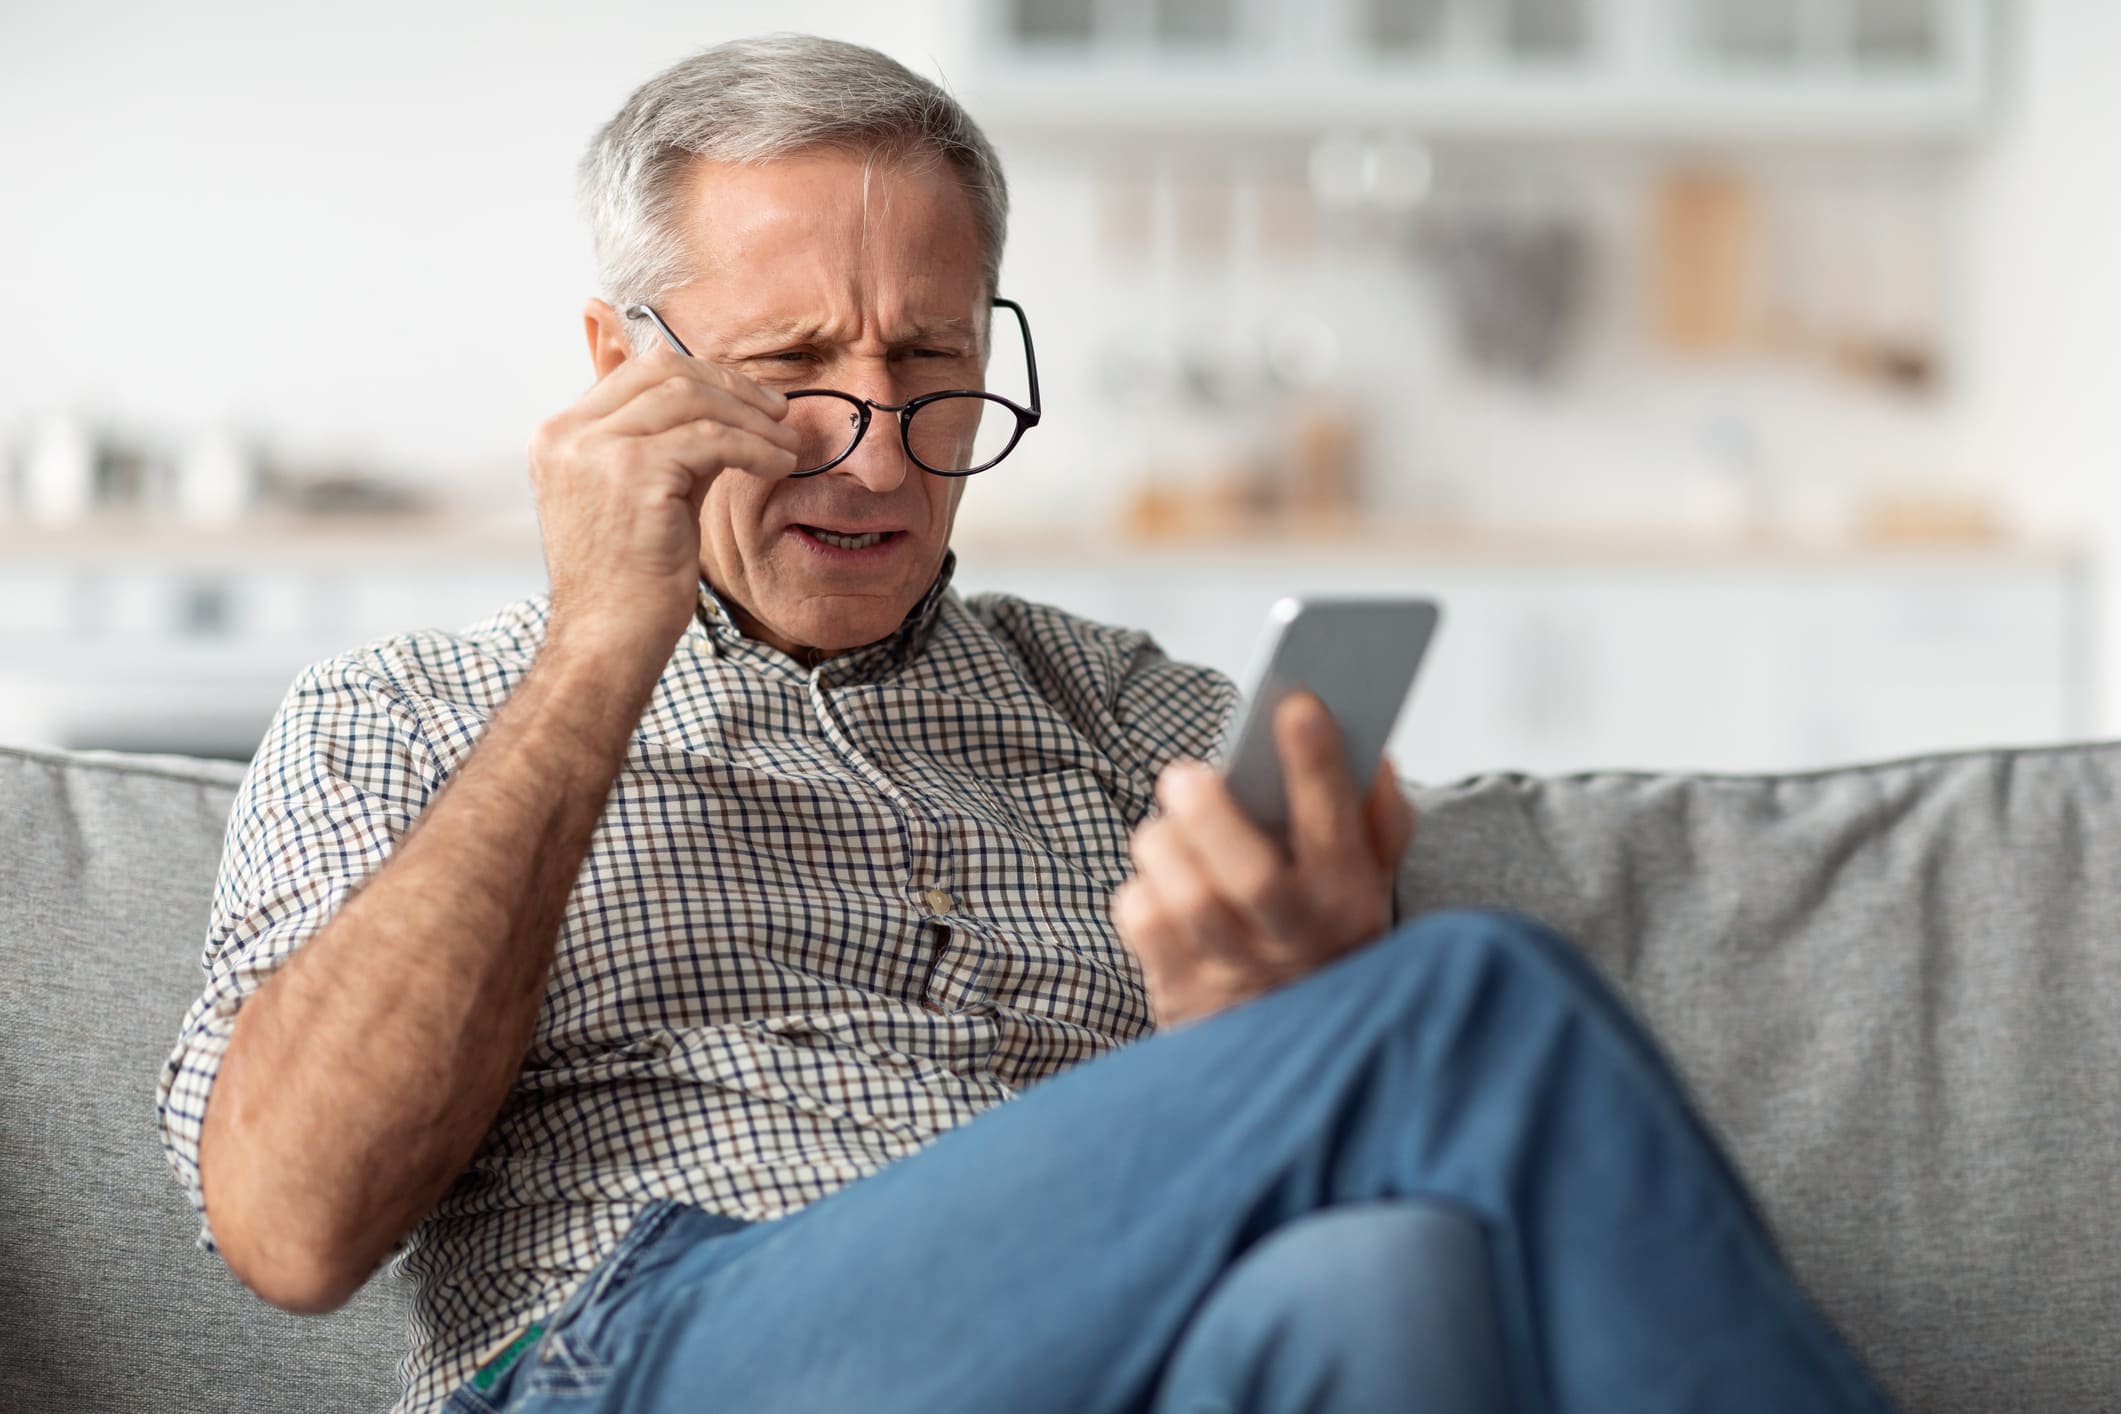 Elderly man sitting on a sofa, squinting and adjusting his glasses while looking at a smartphone.